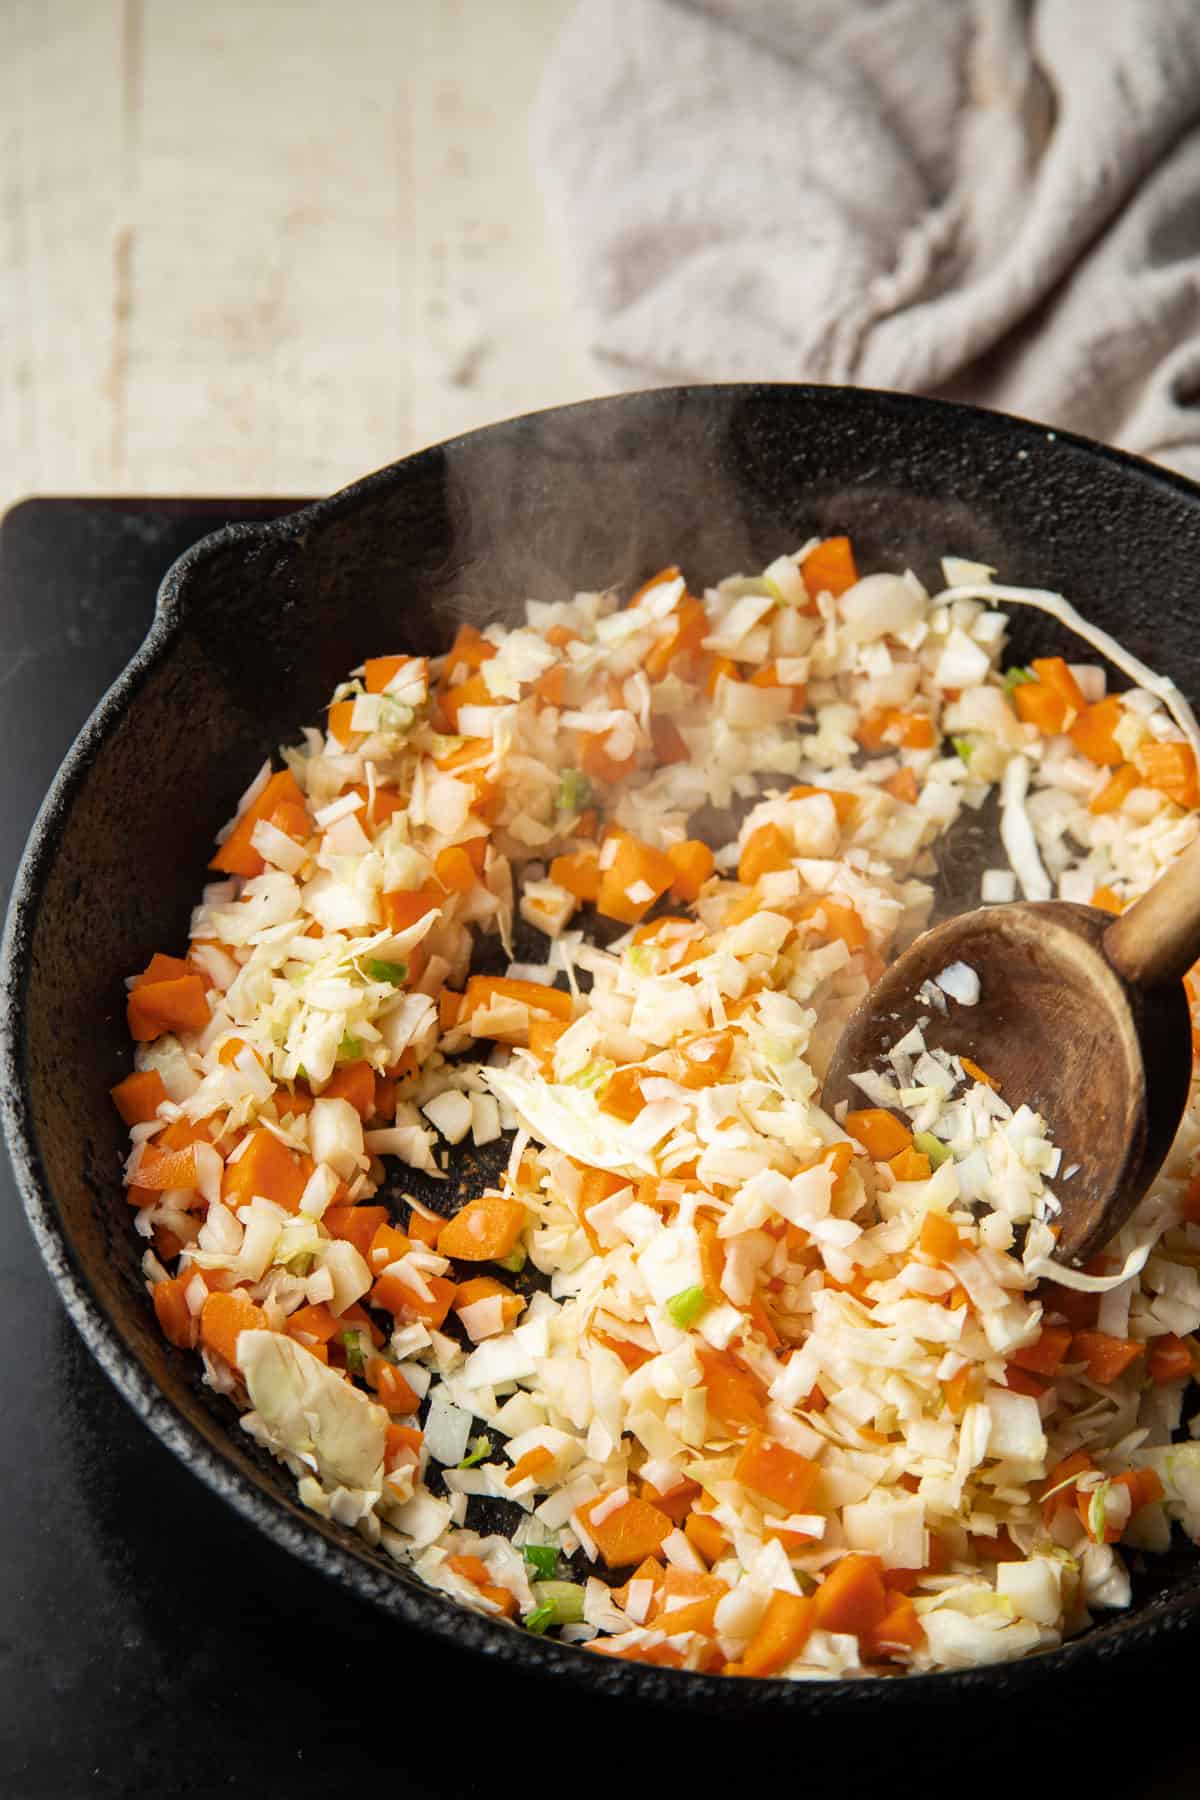 Cabbage, carrots and water chestnuts cooking in a skillet.